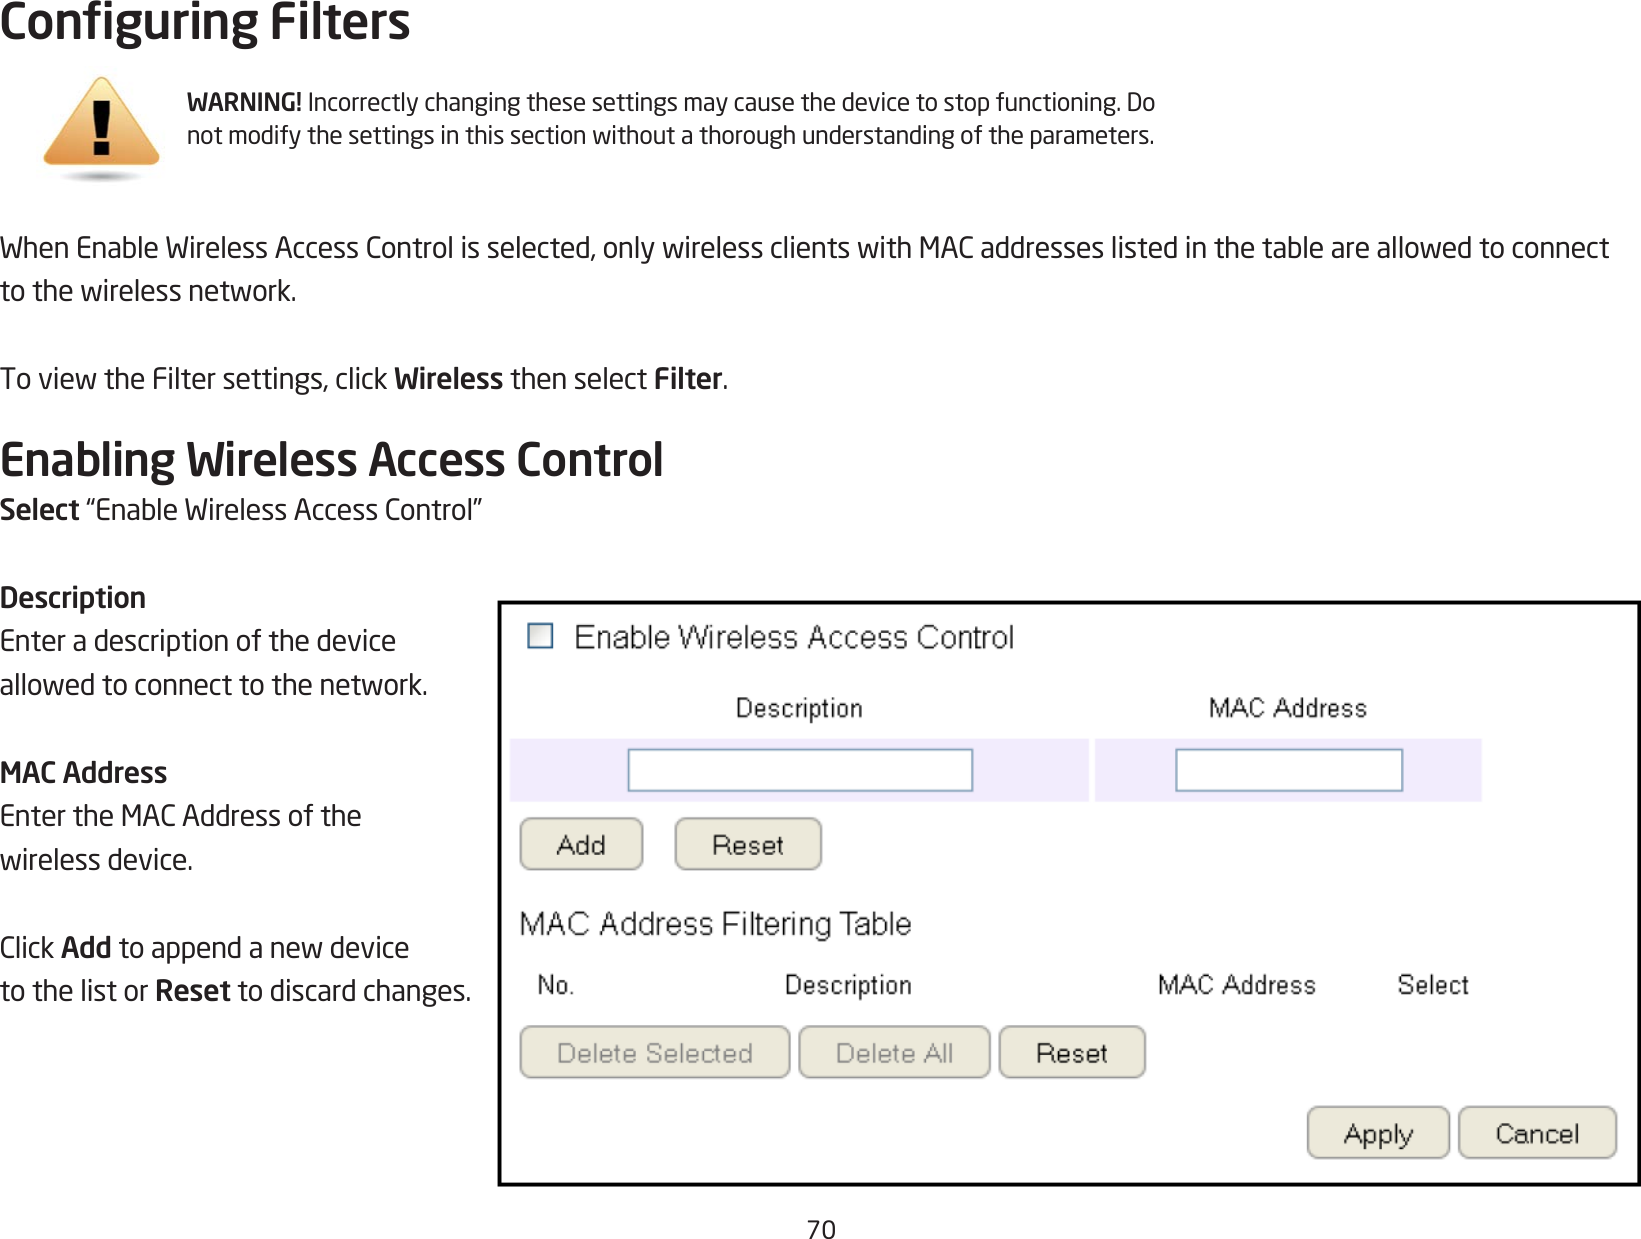 70Conguring FiltersWhenEnableWirelessAccessControlisselected,onlywirelessclientswithMACaddresseslistedinthetableareallowedtoconnecttothewirelessnetwork.ToviewtheFiltersettings,clickWireless then select Filter.Enabling Wireless Access ControlSelect“EnableWirelessAccessControl”DescriptionEnter a description of the device allowedtoconnecttothenetwork.MAC AddressEntertheMACAddressofthewirelessdevice.ClickAdd toappendanewdeviceto the list or Reset to discard changes.WARNING! Incorrectlychangingthesesettingsmaycausethedevicetostopfunctioning.Donotmodifythesettingsinthissectionwithoutathoroughunderstandingoftheparameters.